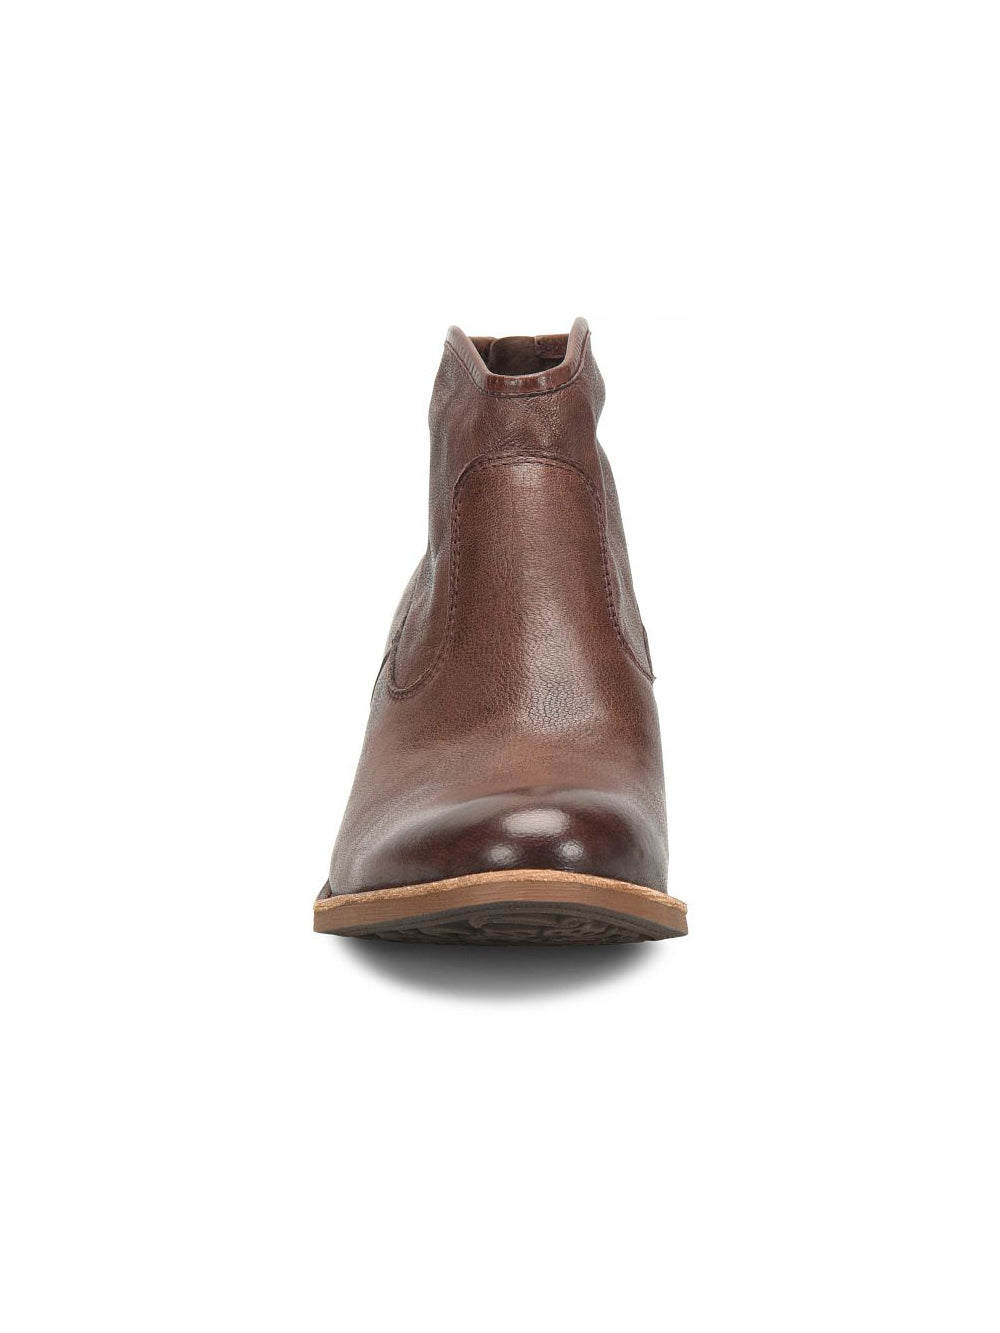 sofft shoes aisley heeled ankle bootie with back zipper in cocoa brown leather